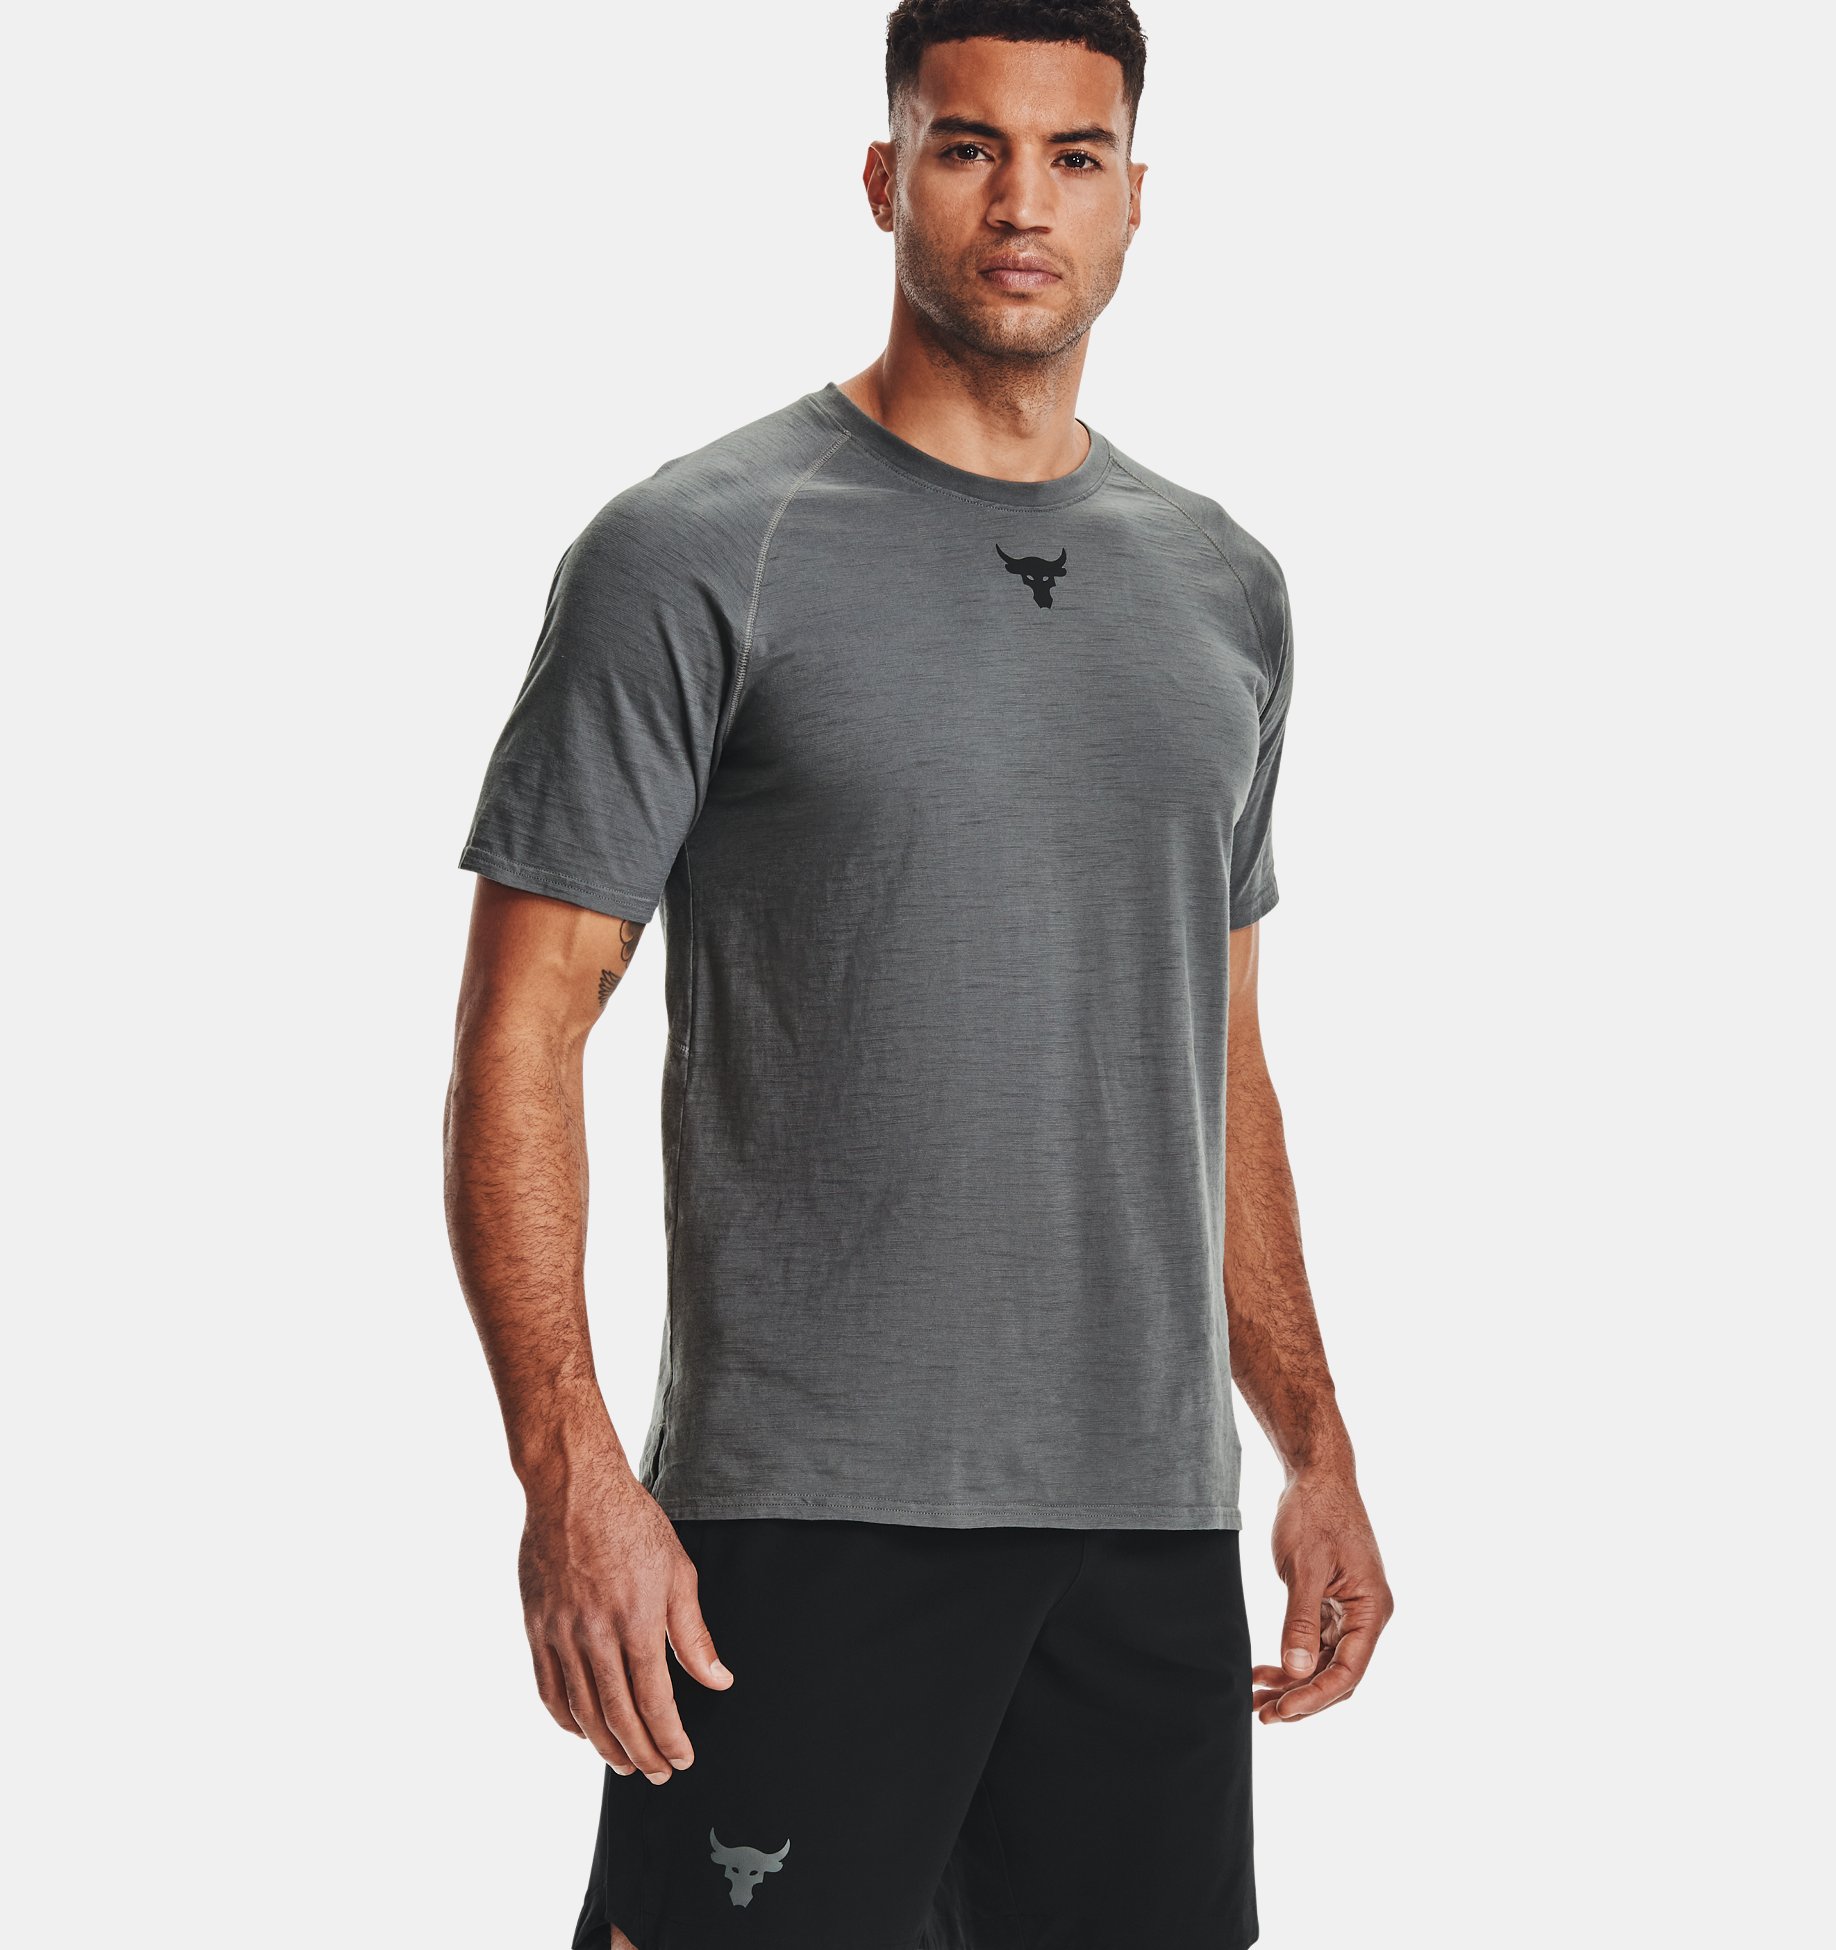 Under Armour Mens Charged Cotton V-Neck Short-Sleeve T-Shirt 